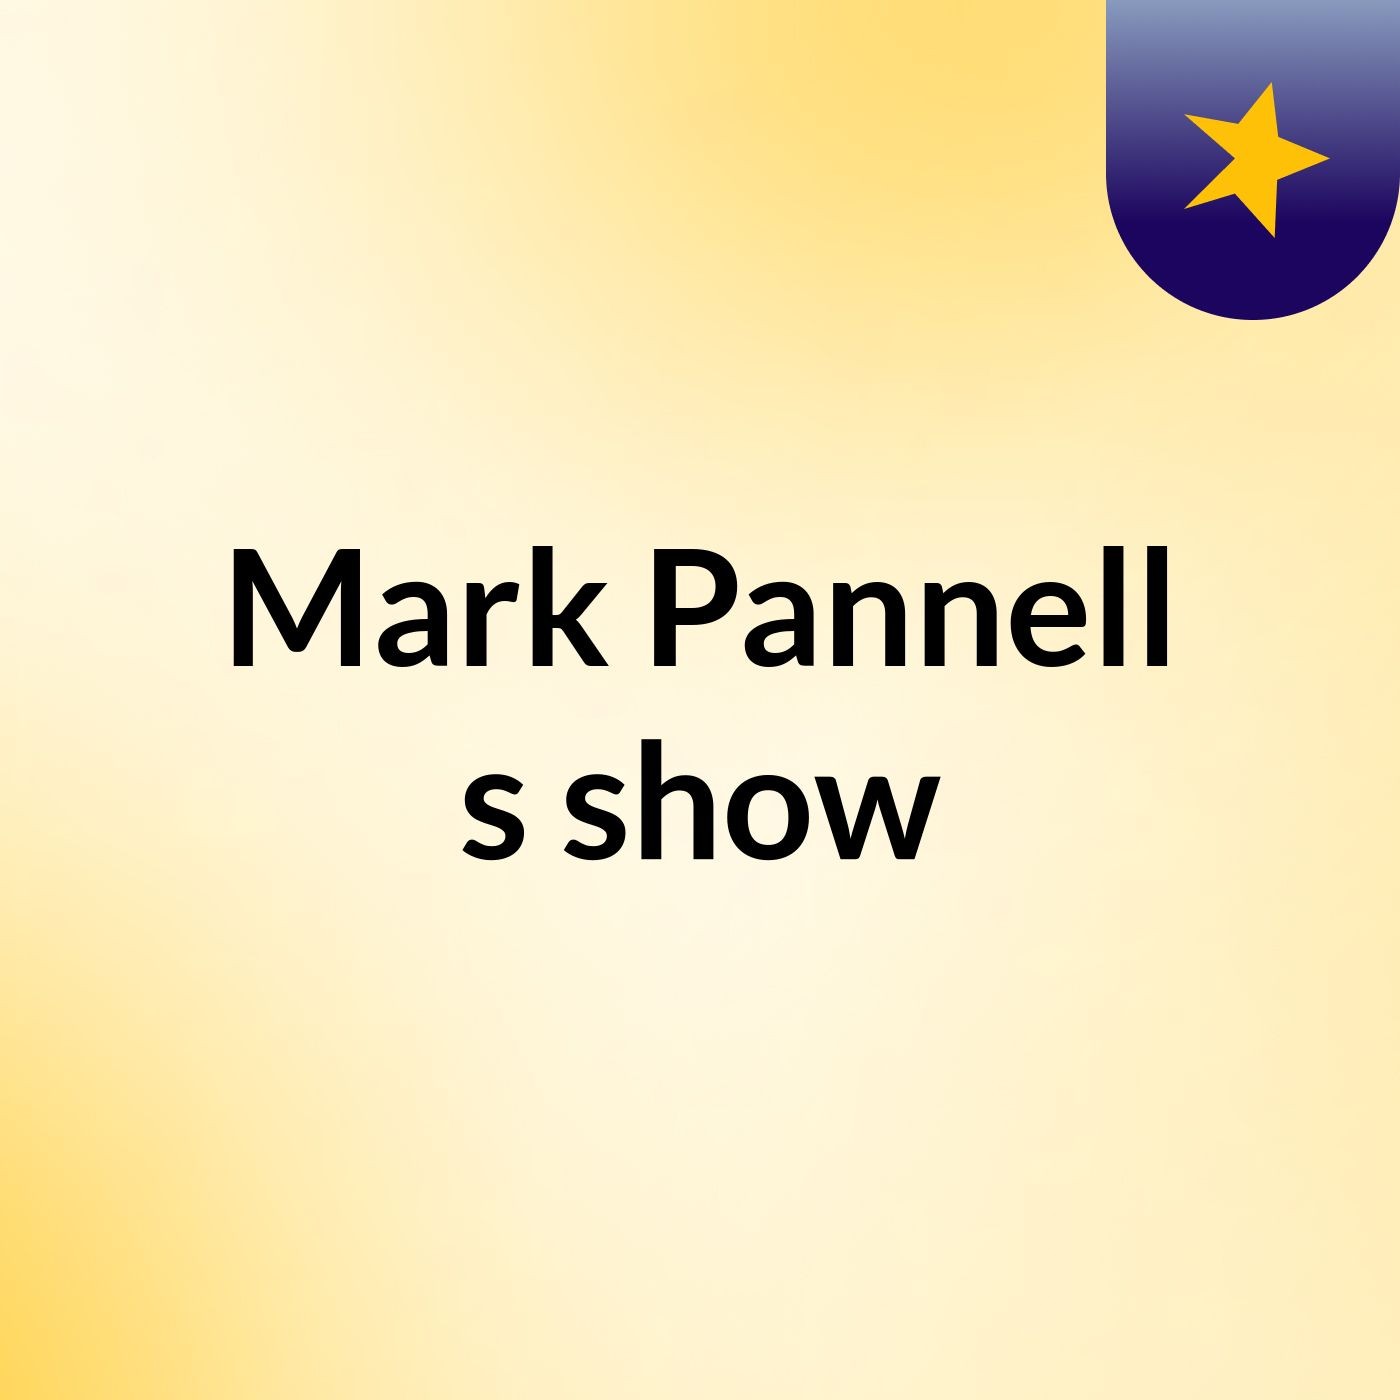 Mark Pannell's show